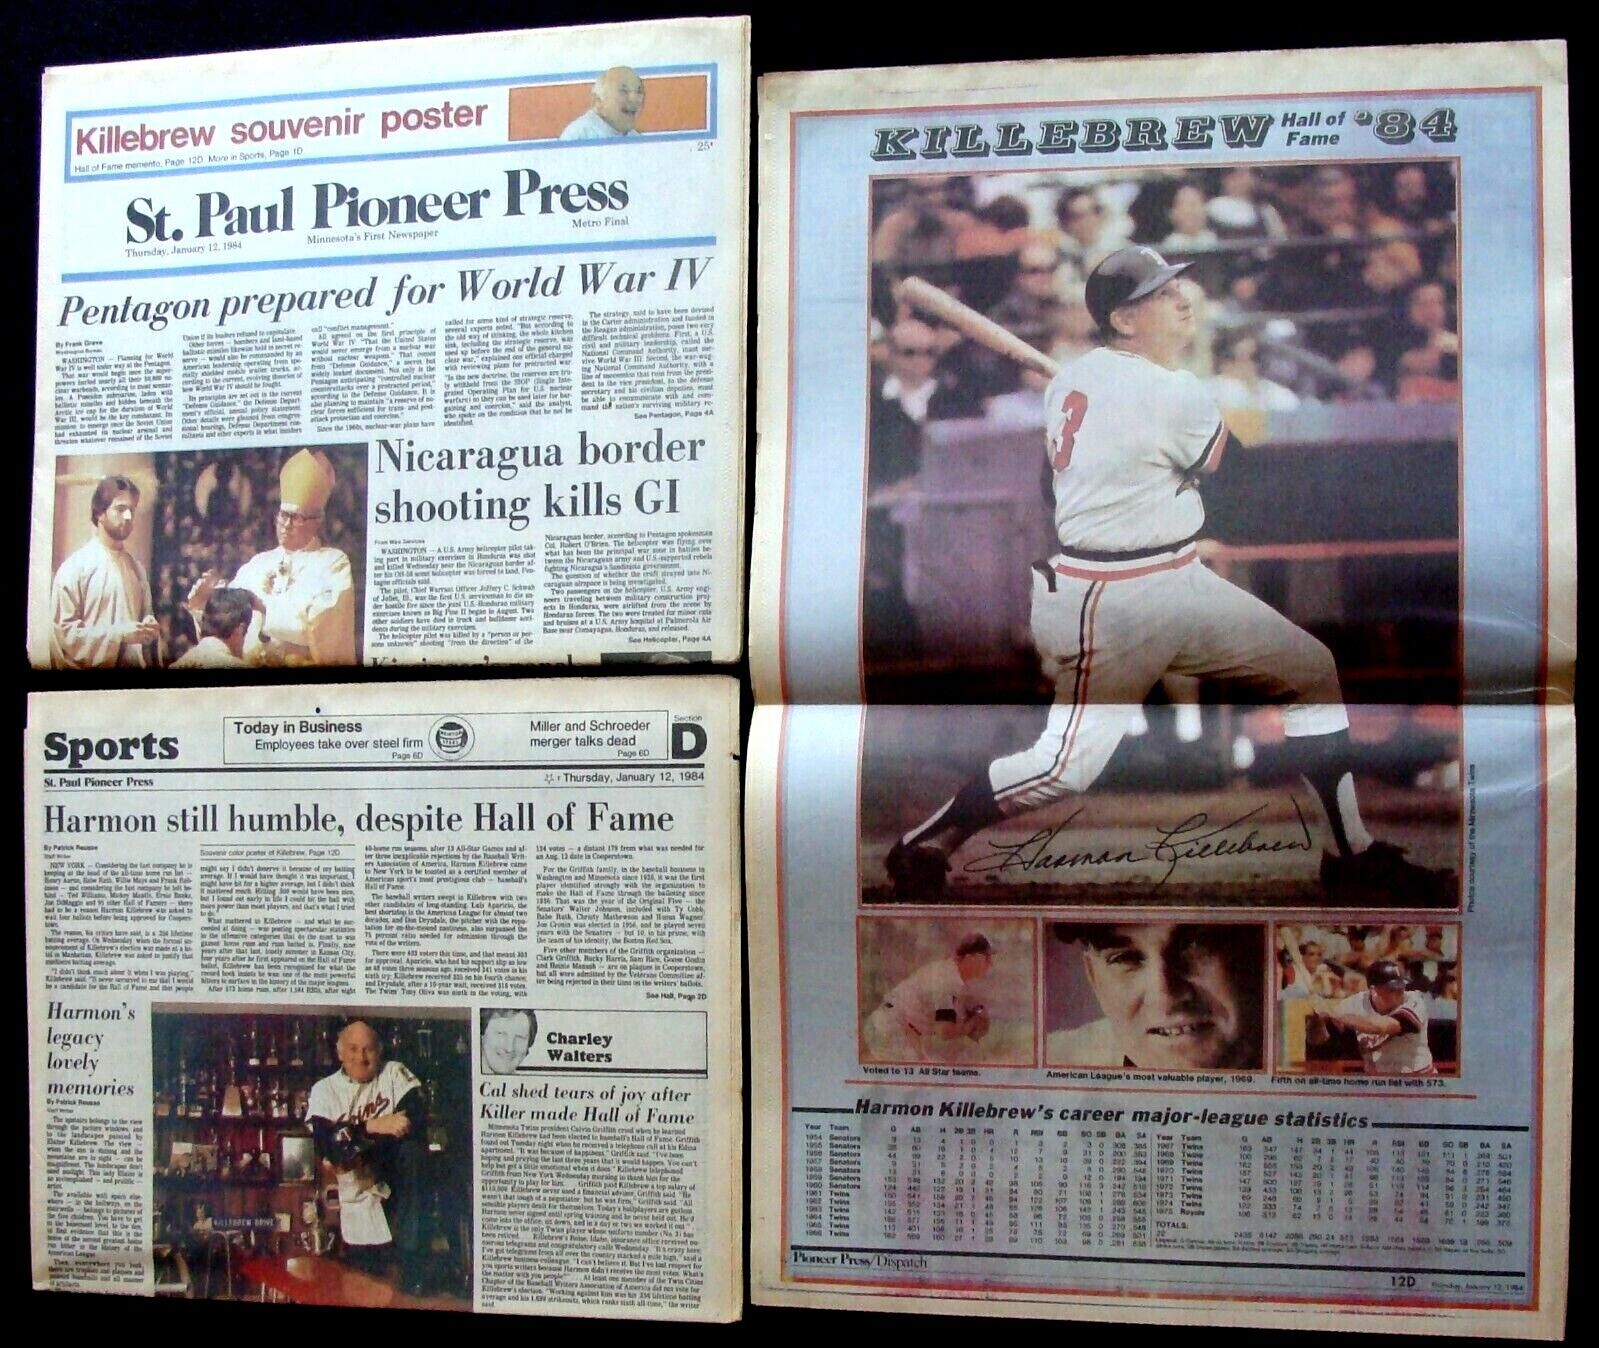 1984 HARMON KILLEBREW HOF ELECTION ST. PAUL NEWSPAPER & SPORTS SECTION W/ POSTER